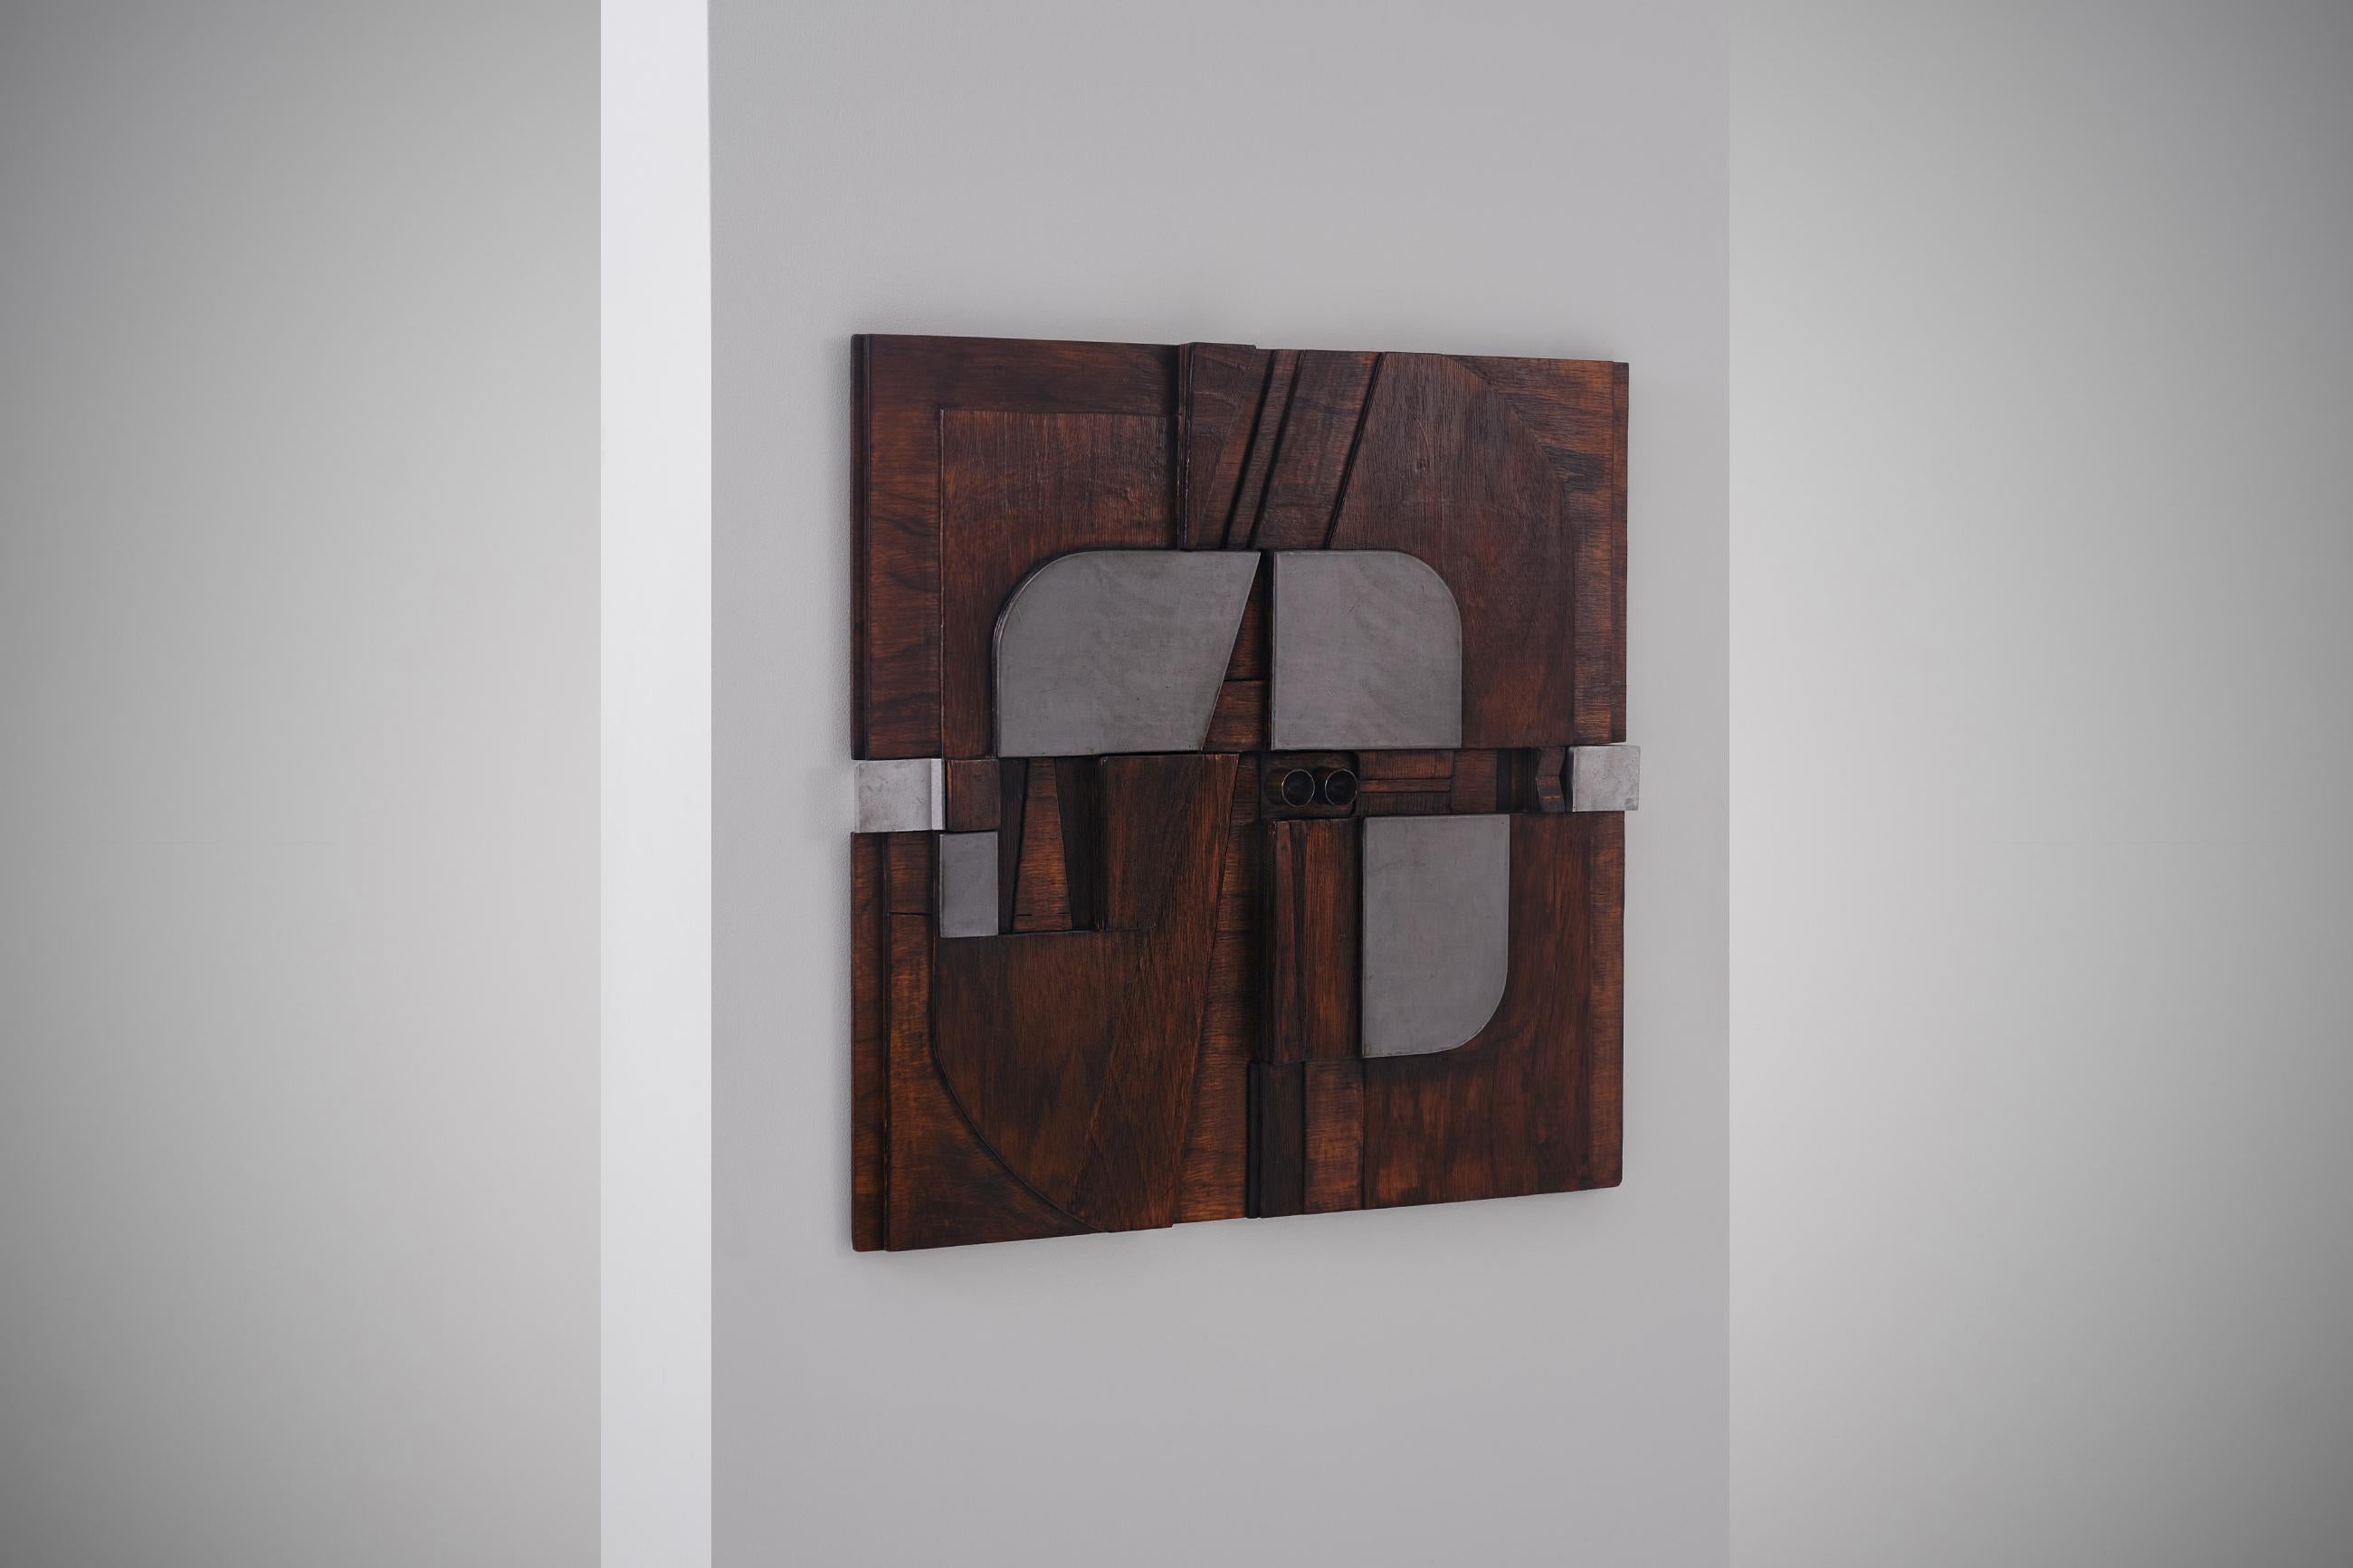 Beautiful wooden artwork by Nerone & Patuzzi (Gruppo NP2), Torino, Italy 1970. The panel is composed of of carved wooden forms, aluminium and zinc. Style: Abstract Constructivism. In an excellent condition. Gruppo NP2 was founded in 1962 by Nerone